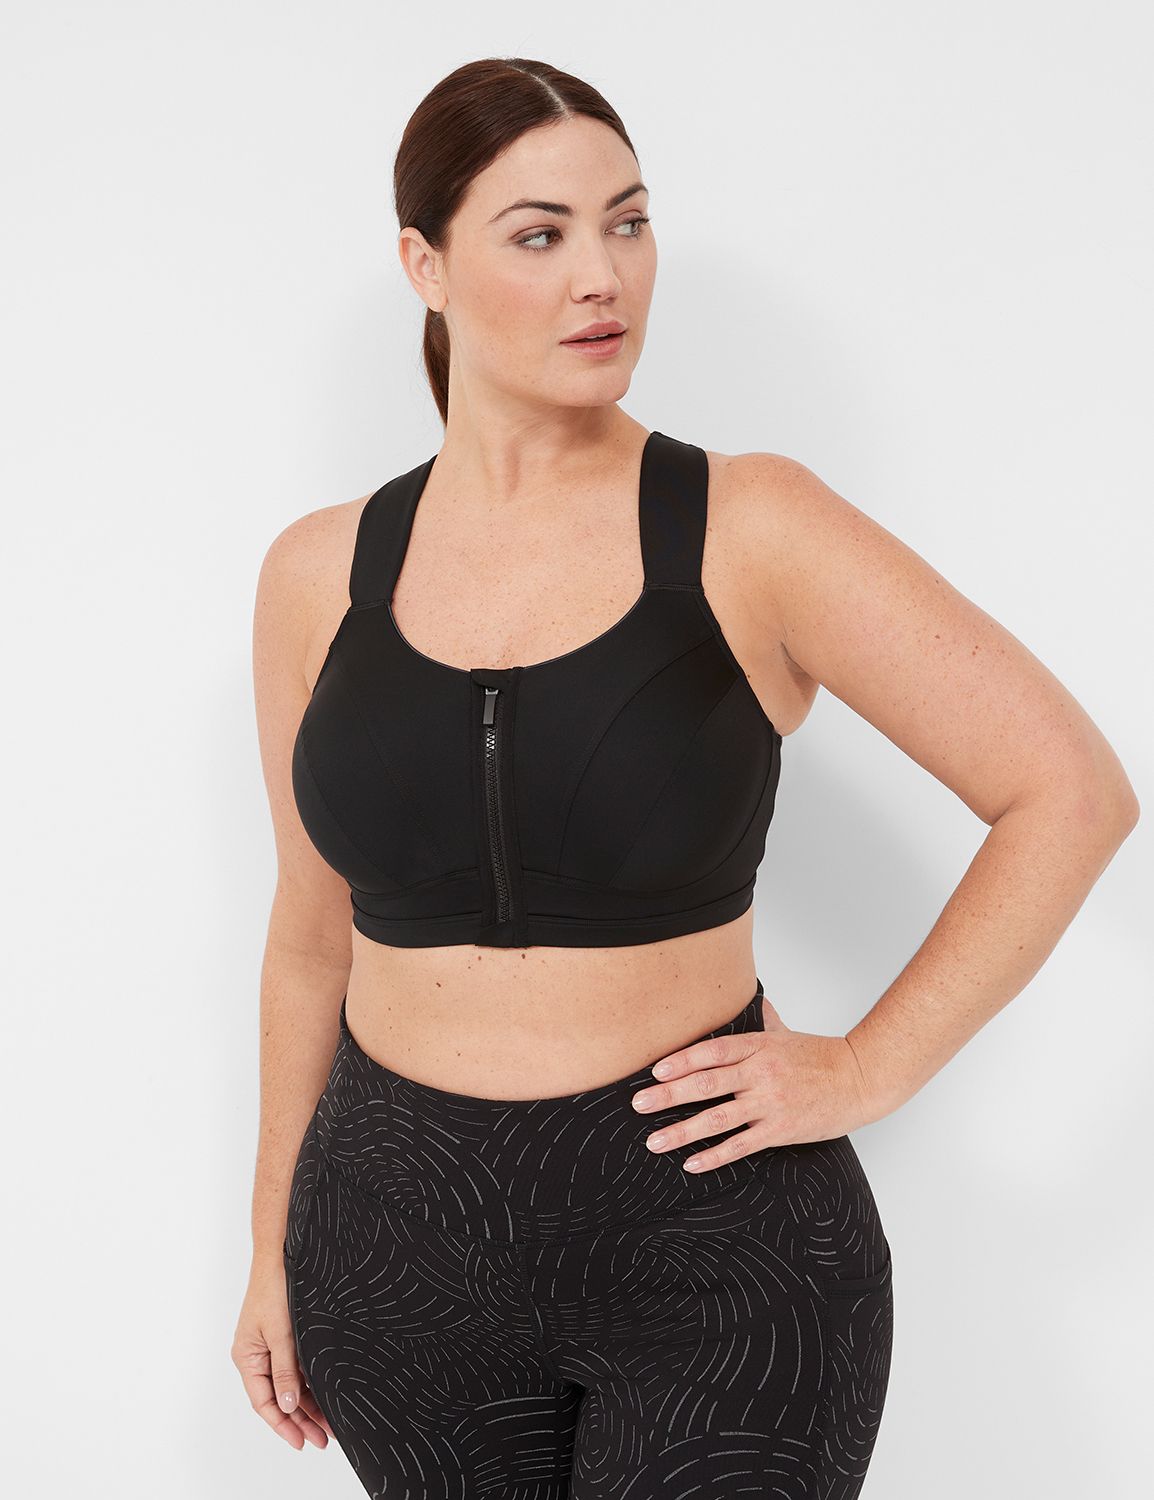 Size 40G Moisture Wicking Plus Size Bras, Shirts, & More